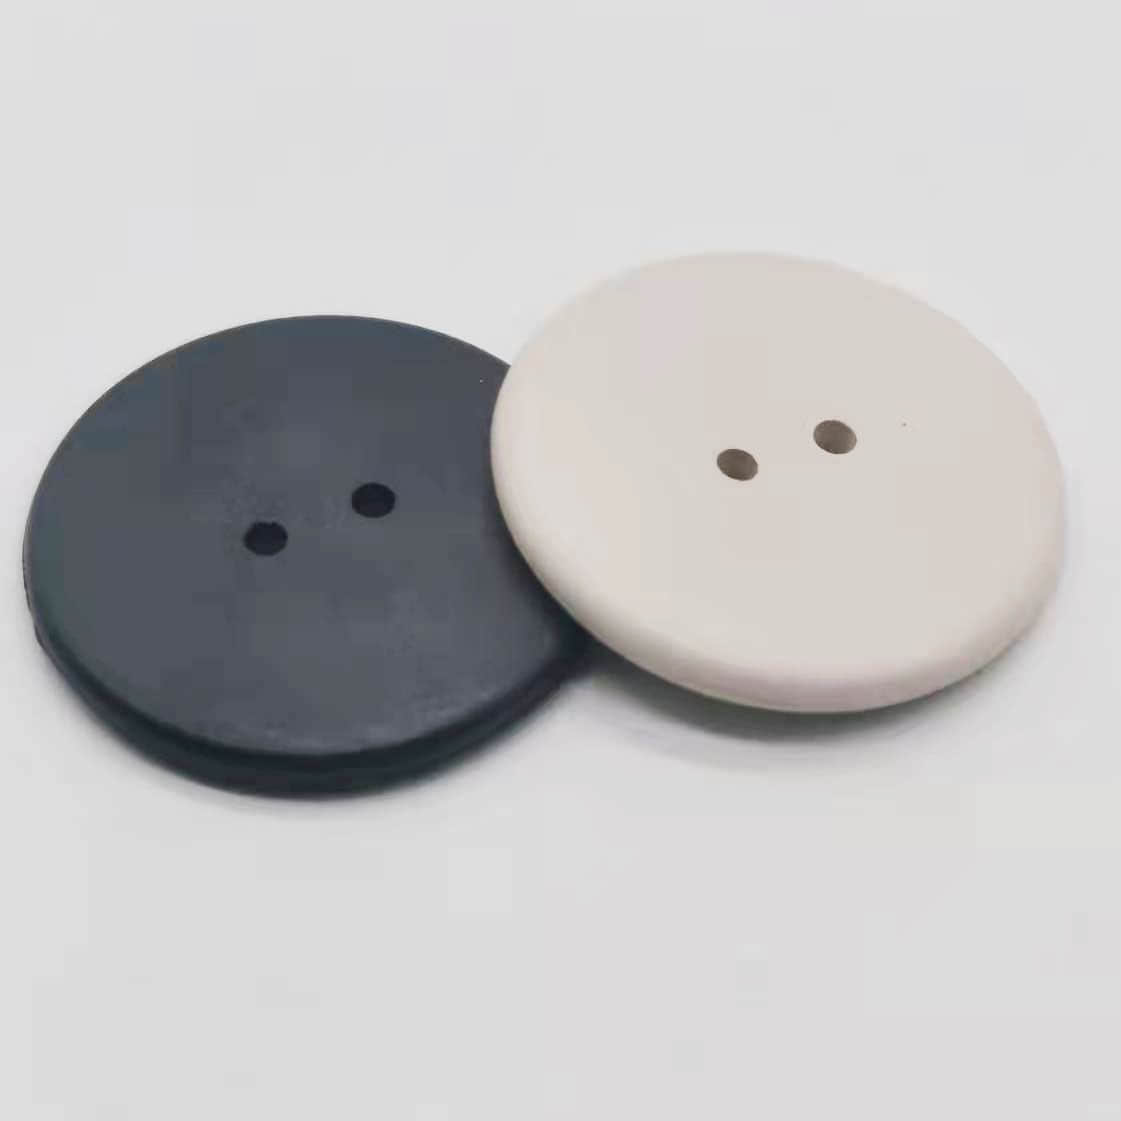 High Temperature Resistant RFID Tags: Differences from Standard RFID Tags